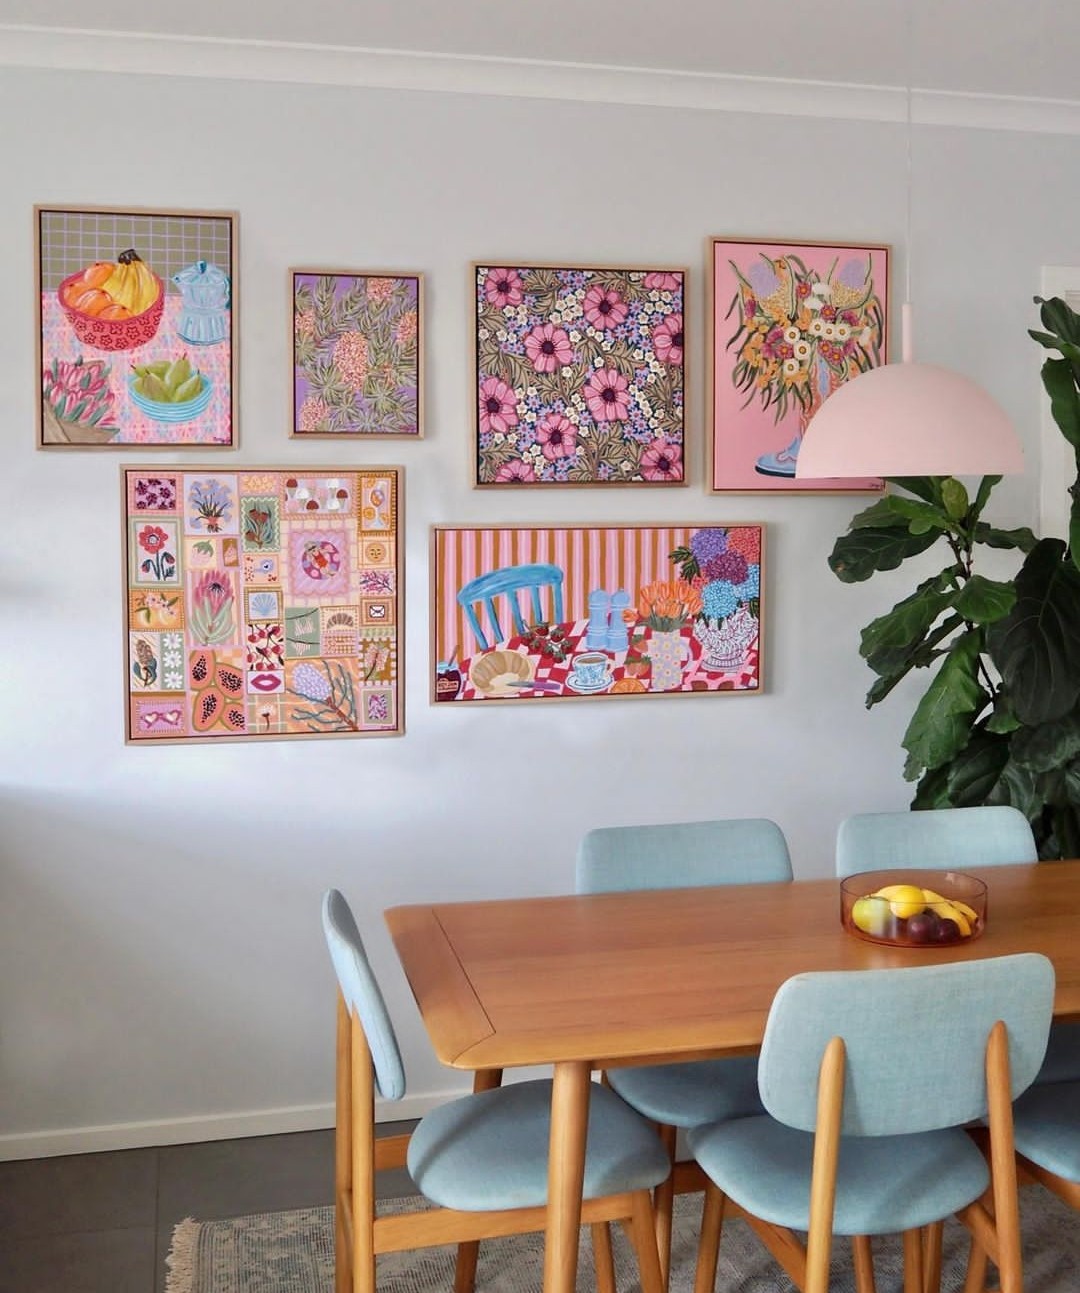 Gallery wall in dining room by Amy Gibbs